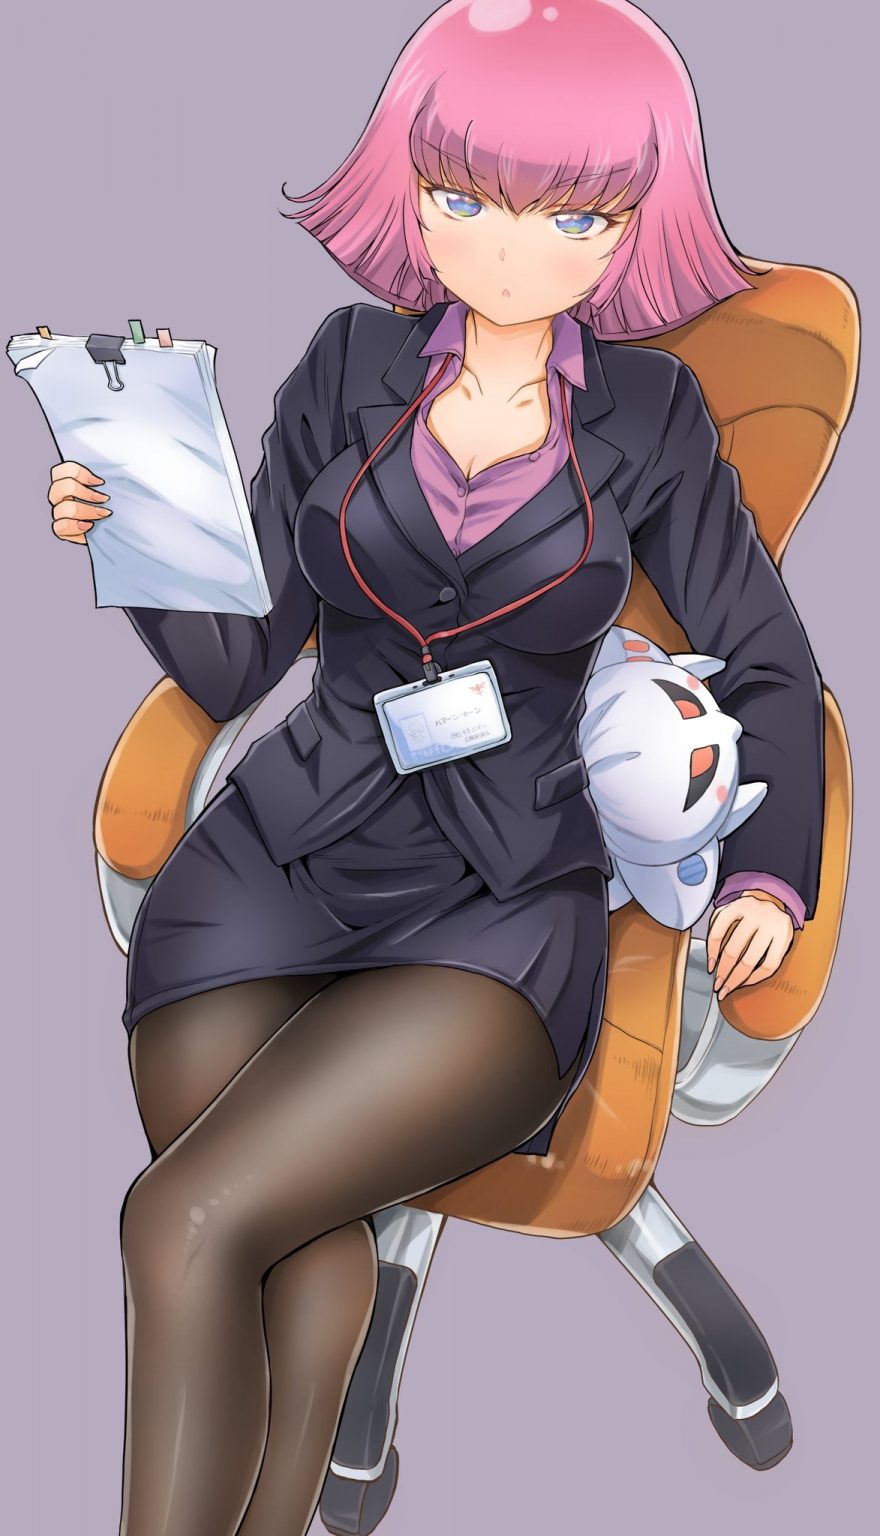 Iconic Gundam Antagonist Haman Karn Reimagined as an Office Lady in New